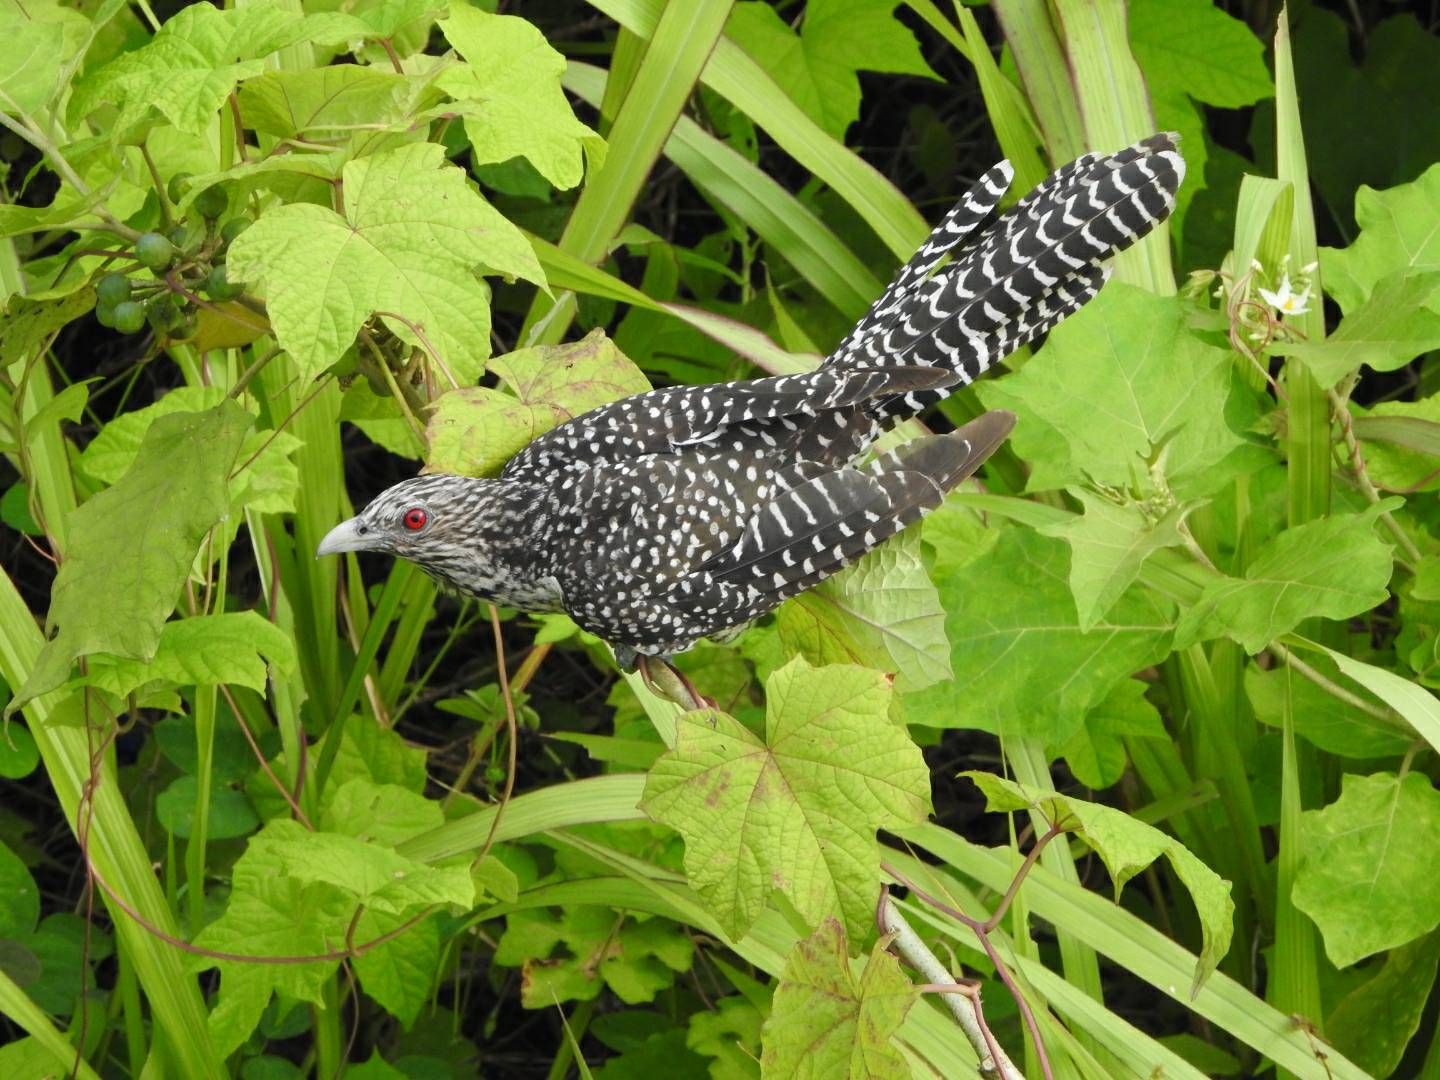 Cuckoo Nature Birds with Red Eyes - Samsung Members